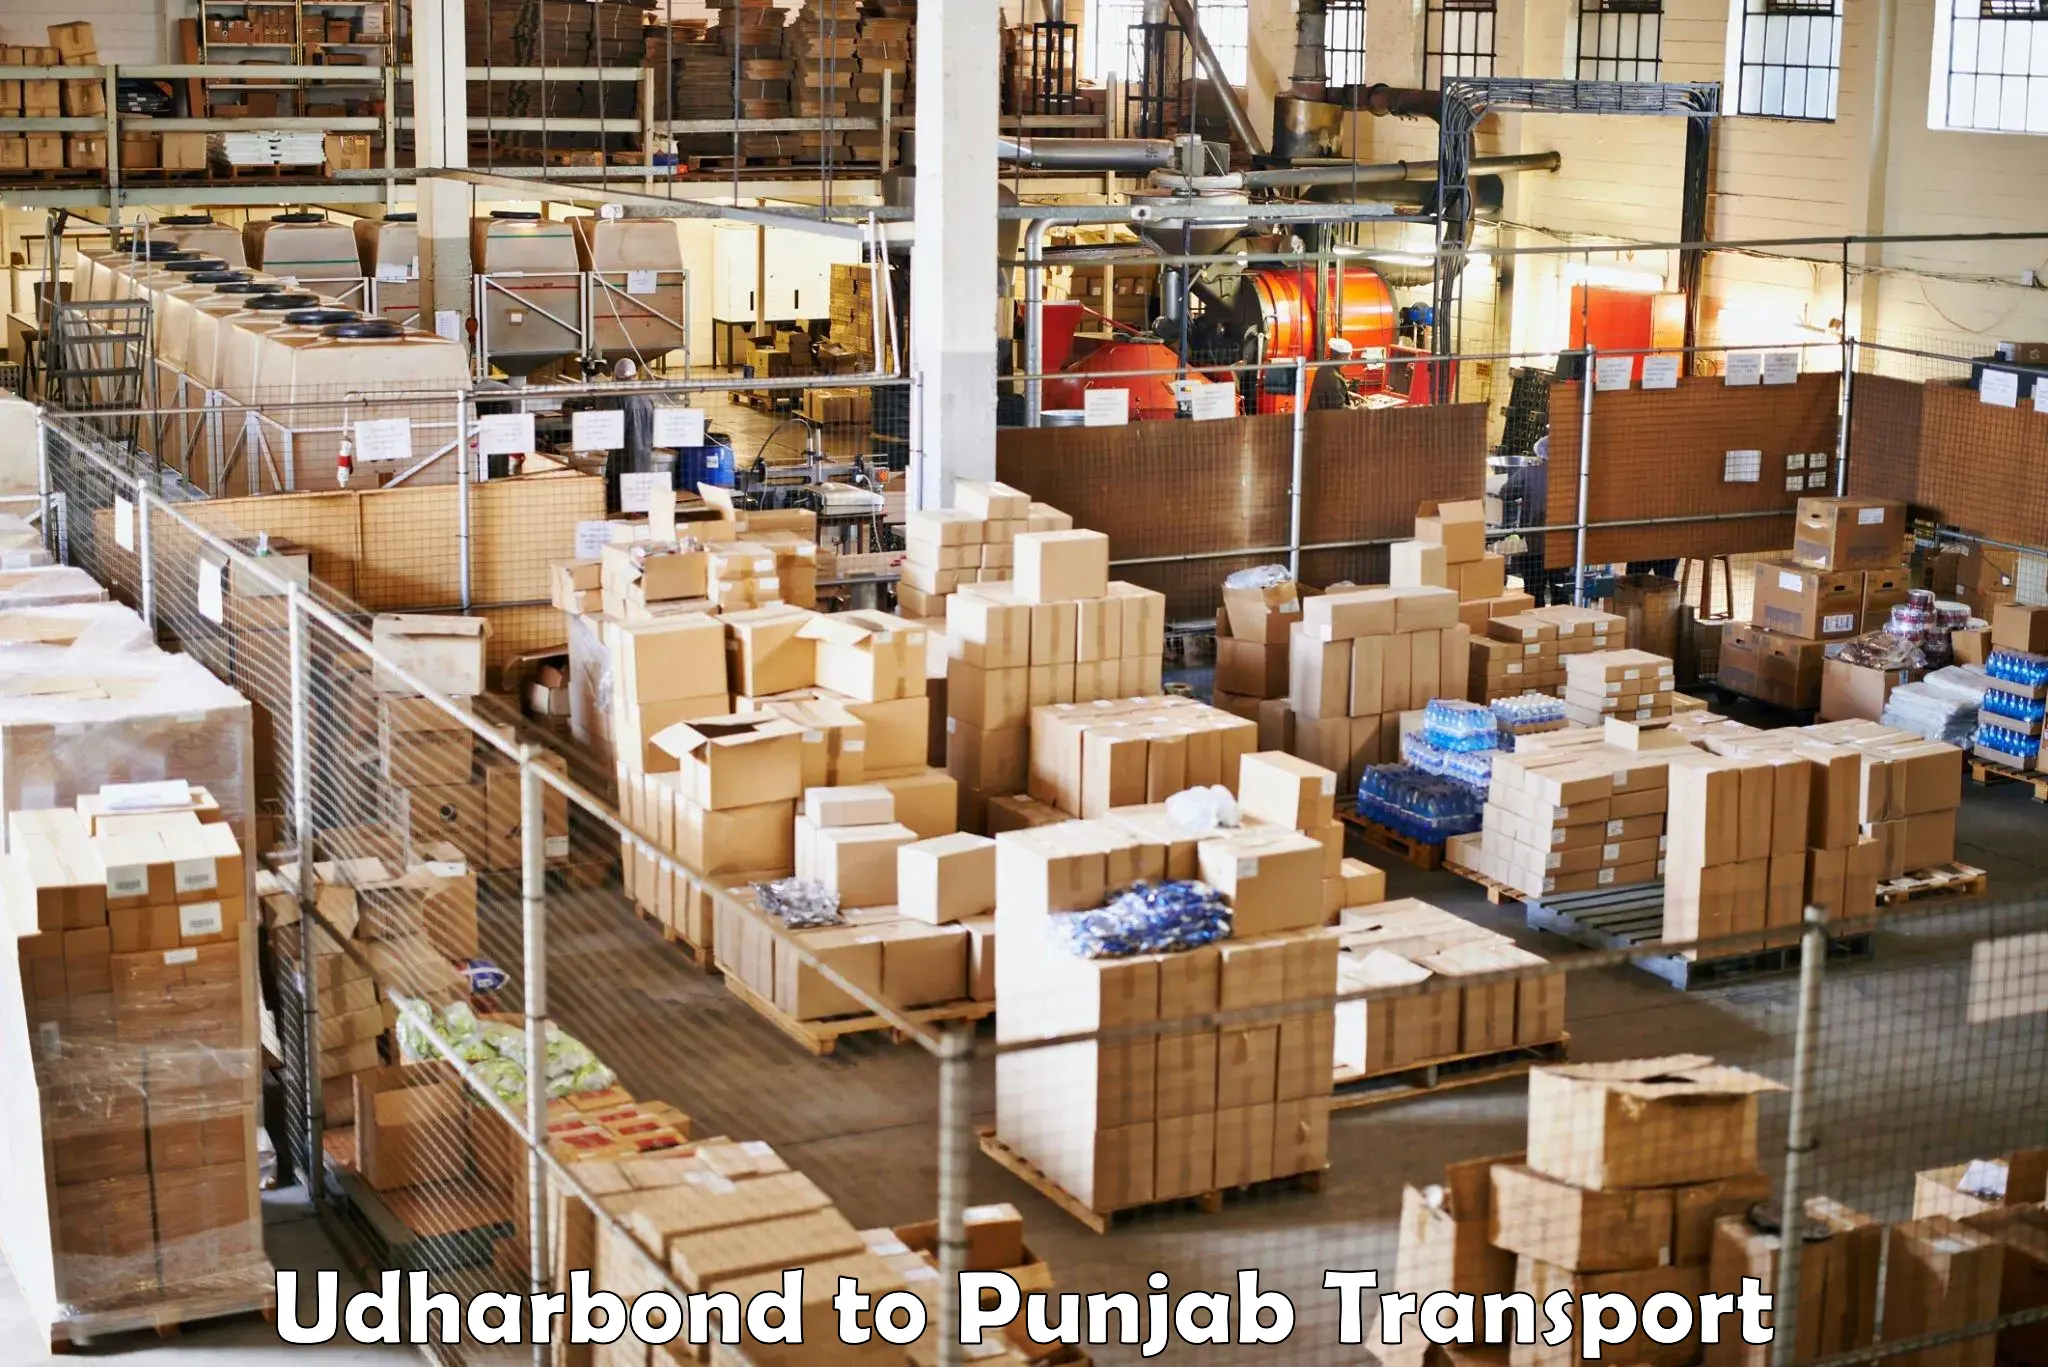 Truck transport companies in India Udharbond to Dhuri